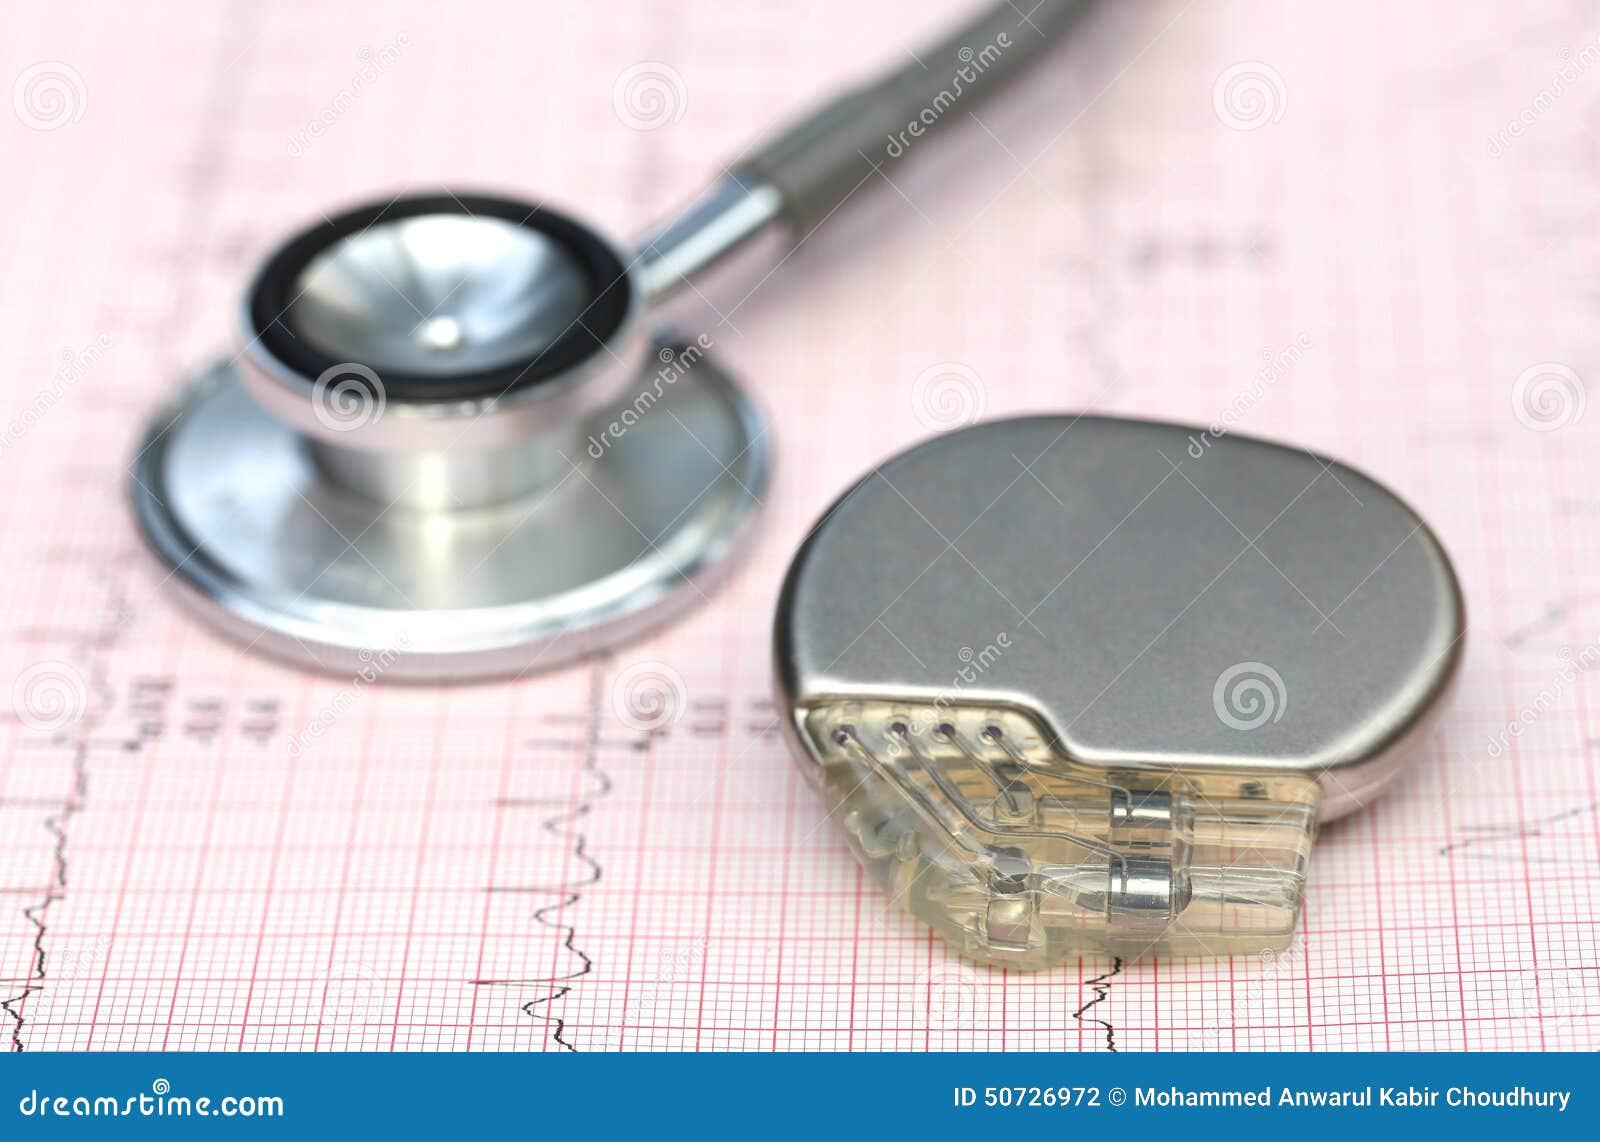 electrocardiograph with stethoscope and pacemaker